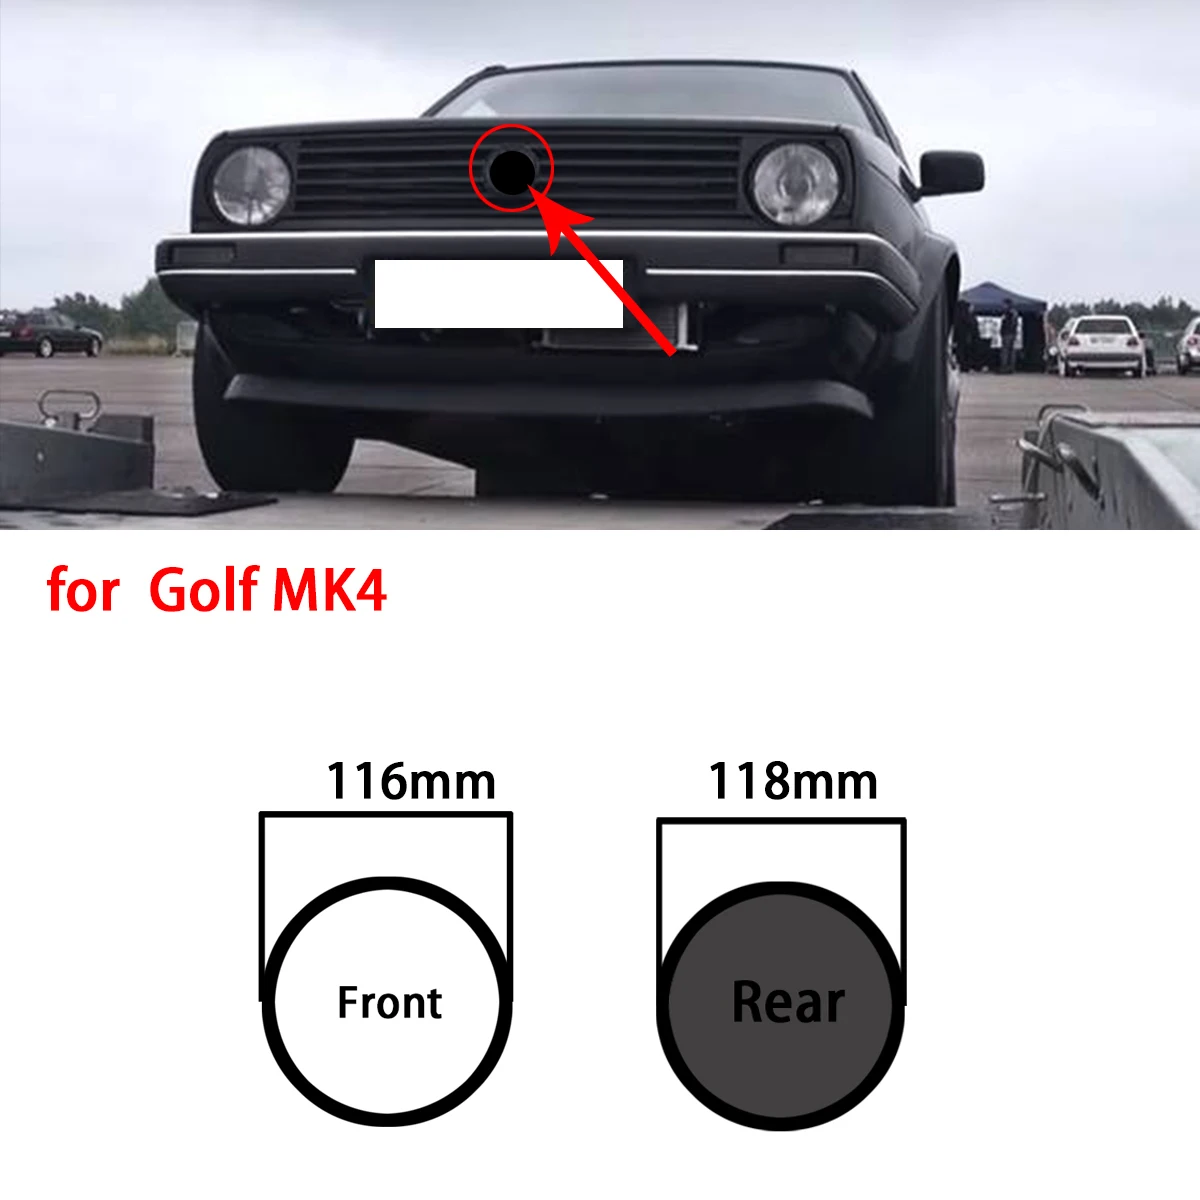 

Gloss Black replacement 116mm Front Grill Cover+ 118mm Rear Trunk Lid for Emblem for Logo Fit for Golf MK4 all model 1999-2006